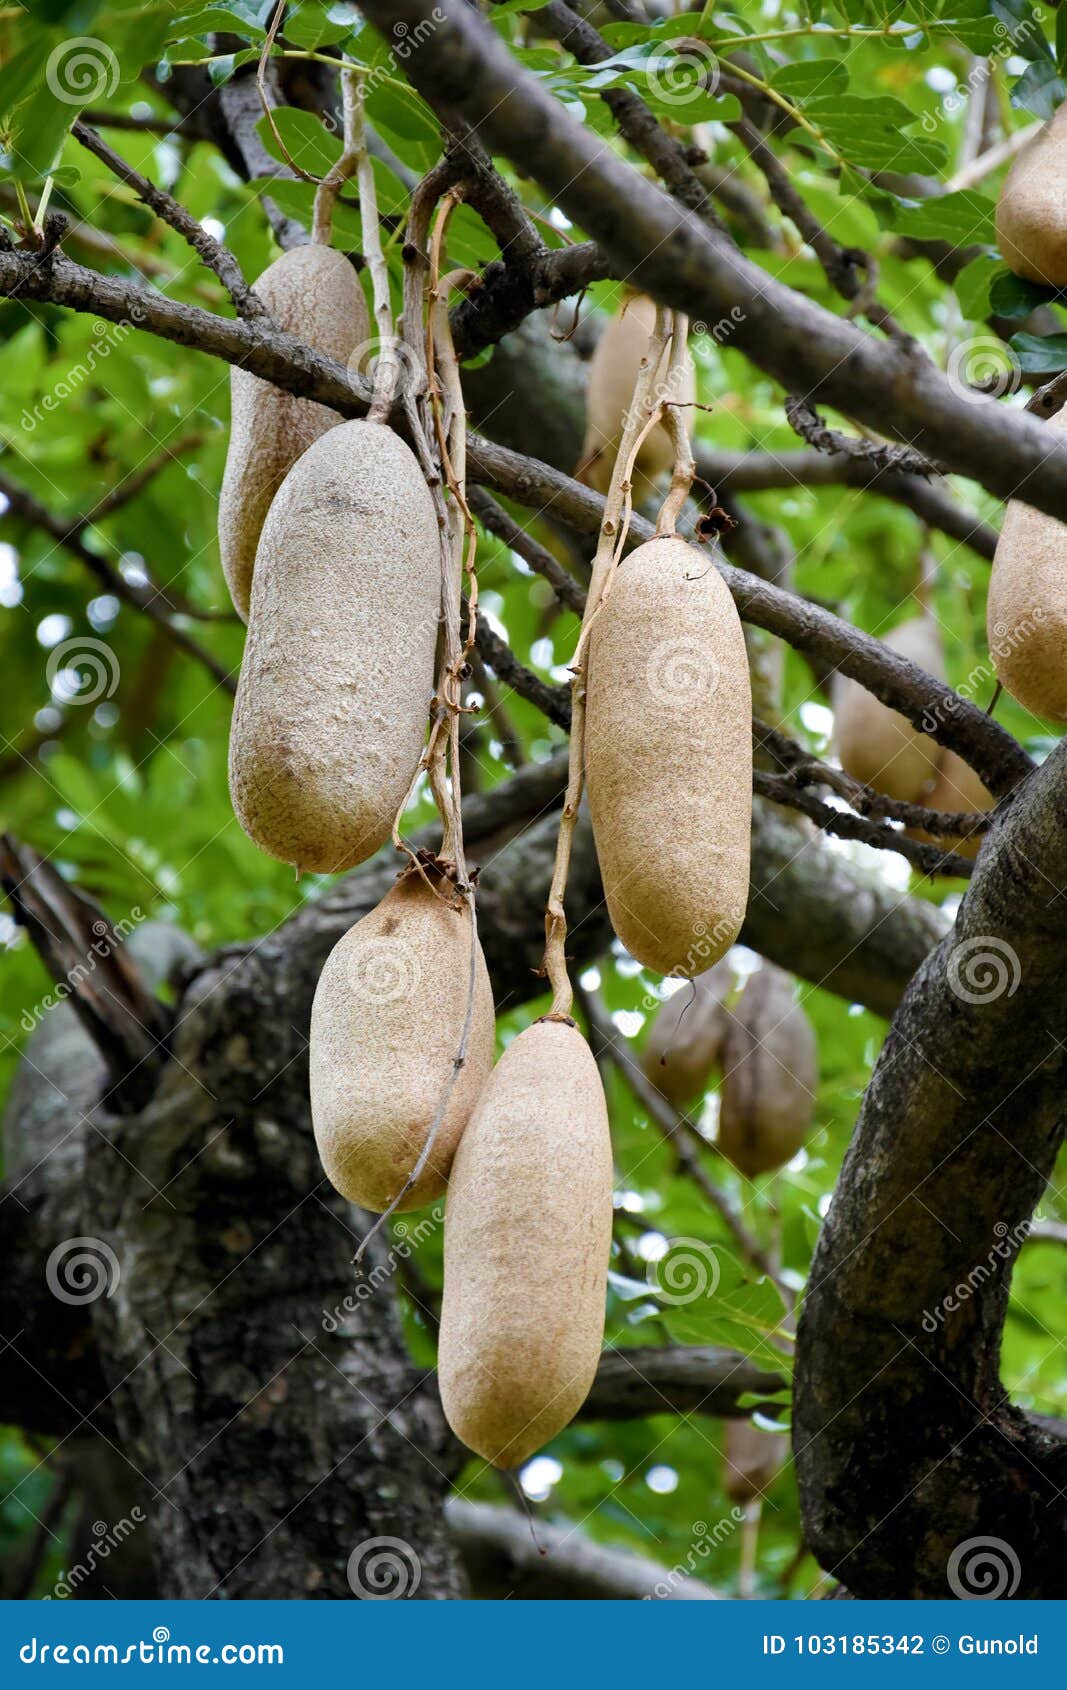 Picture showing Kigelia africana fruits hanging on the tree [1].